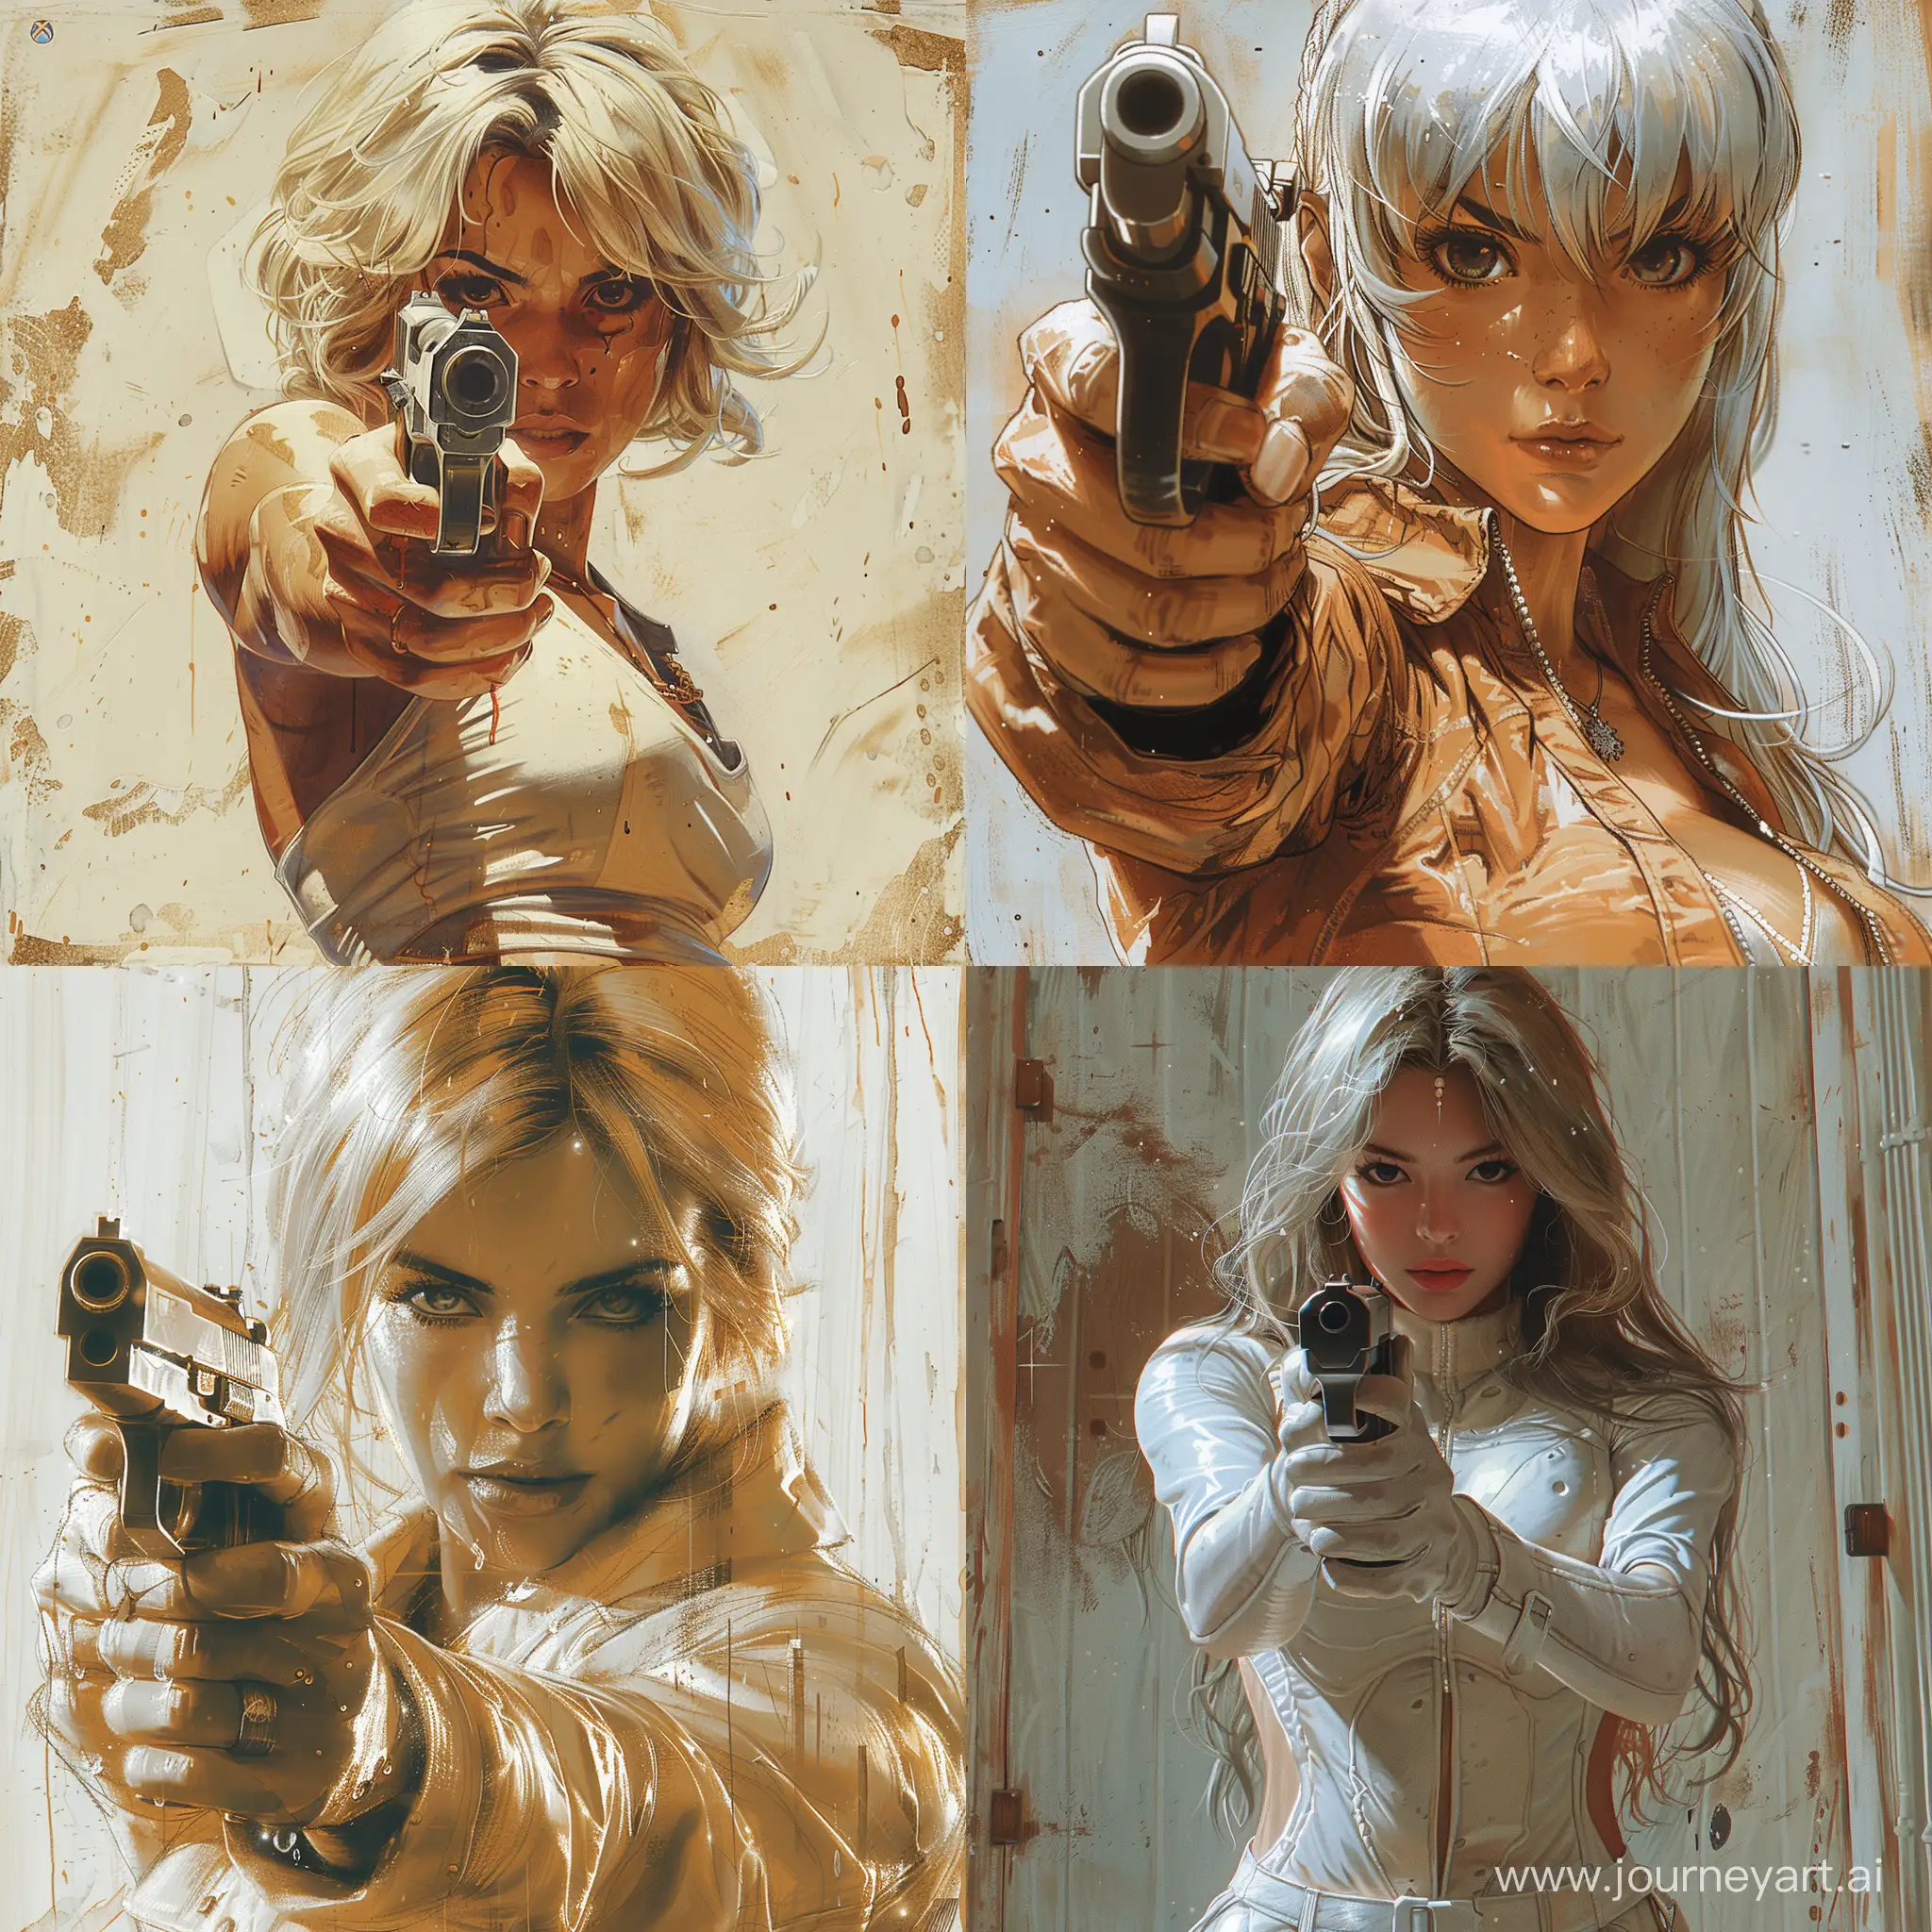 Woman-Character-with-Gun-Realistic-Oil-Painting-in-Bold-Manga-Style